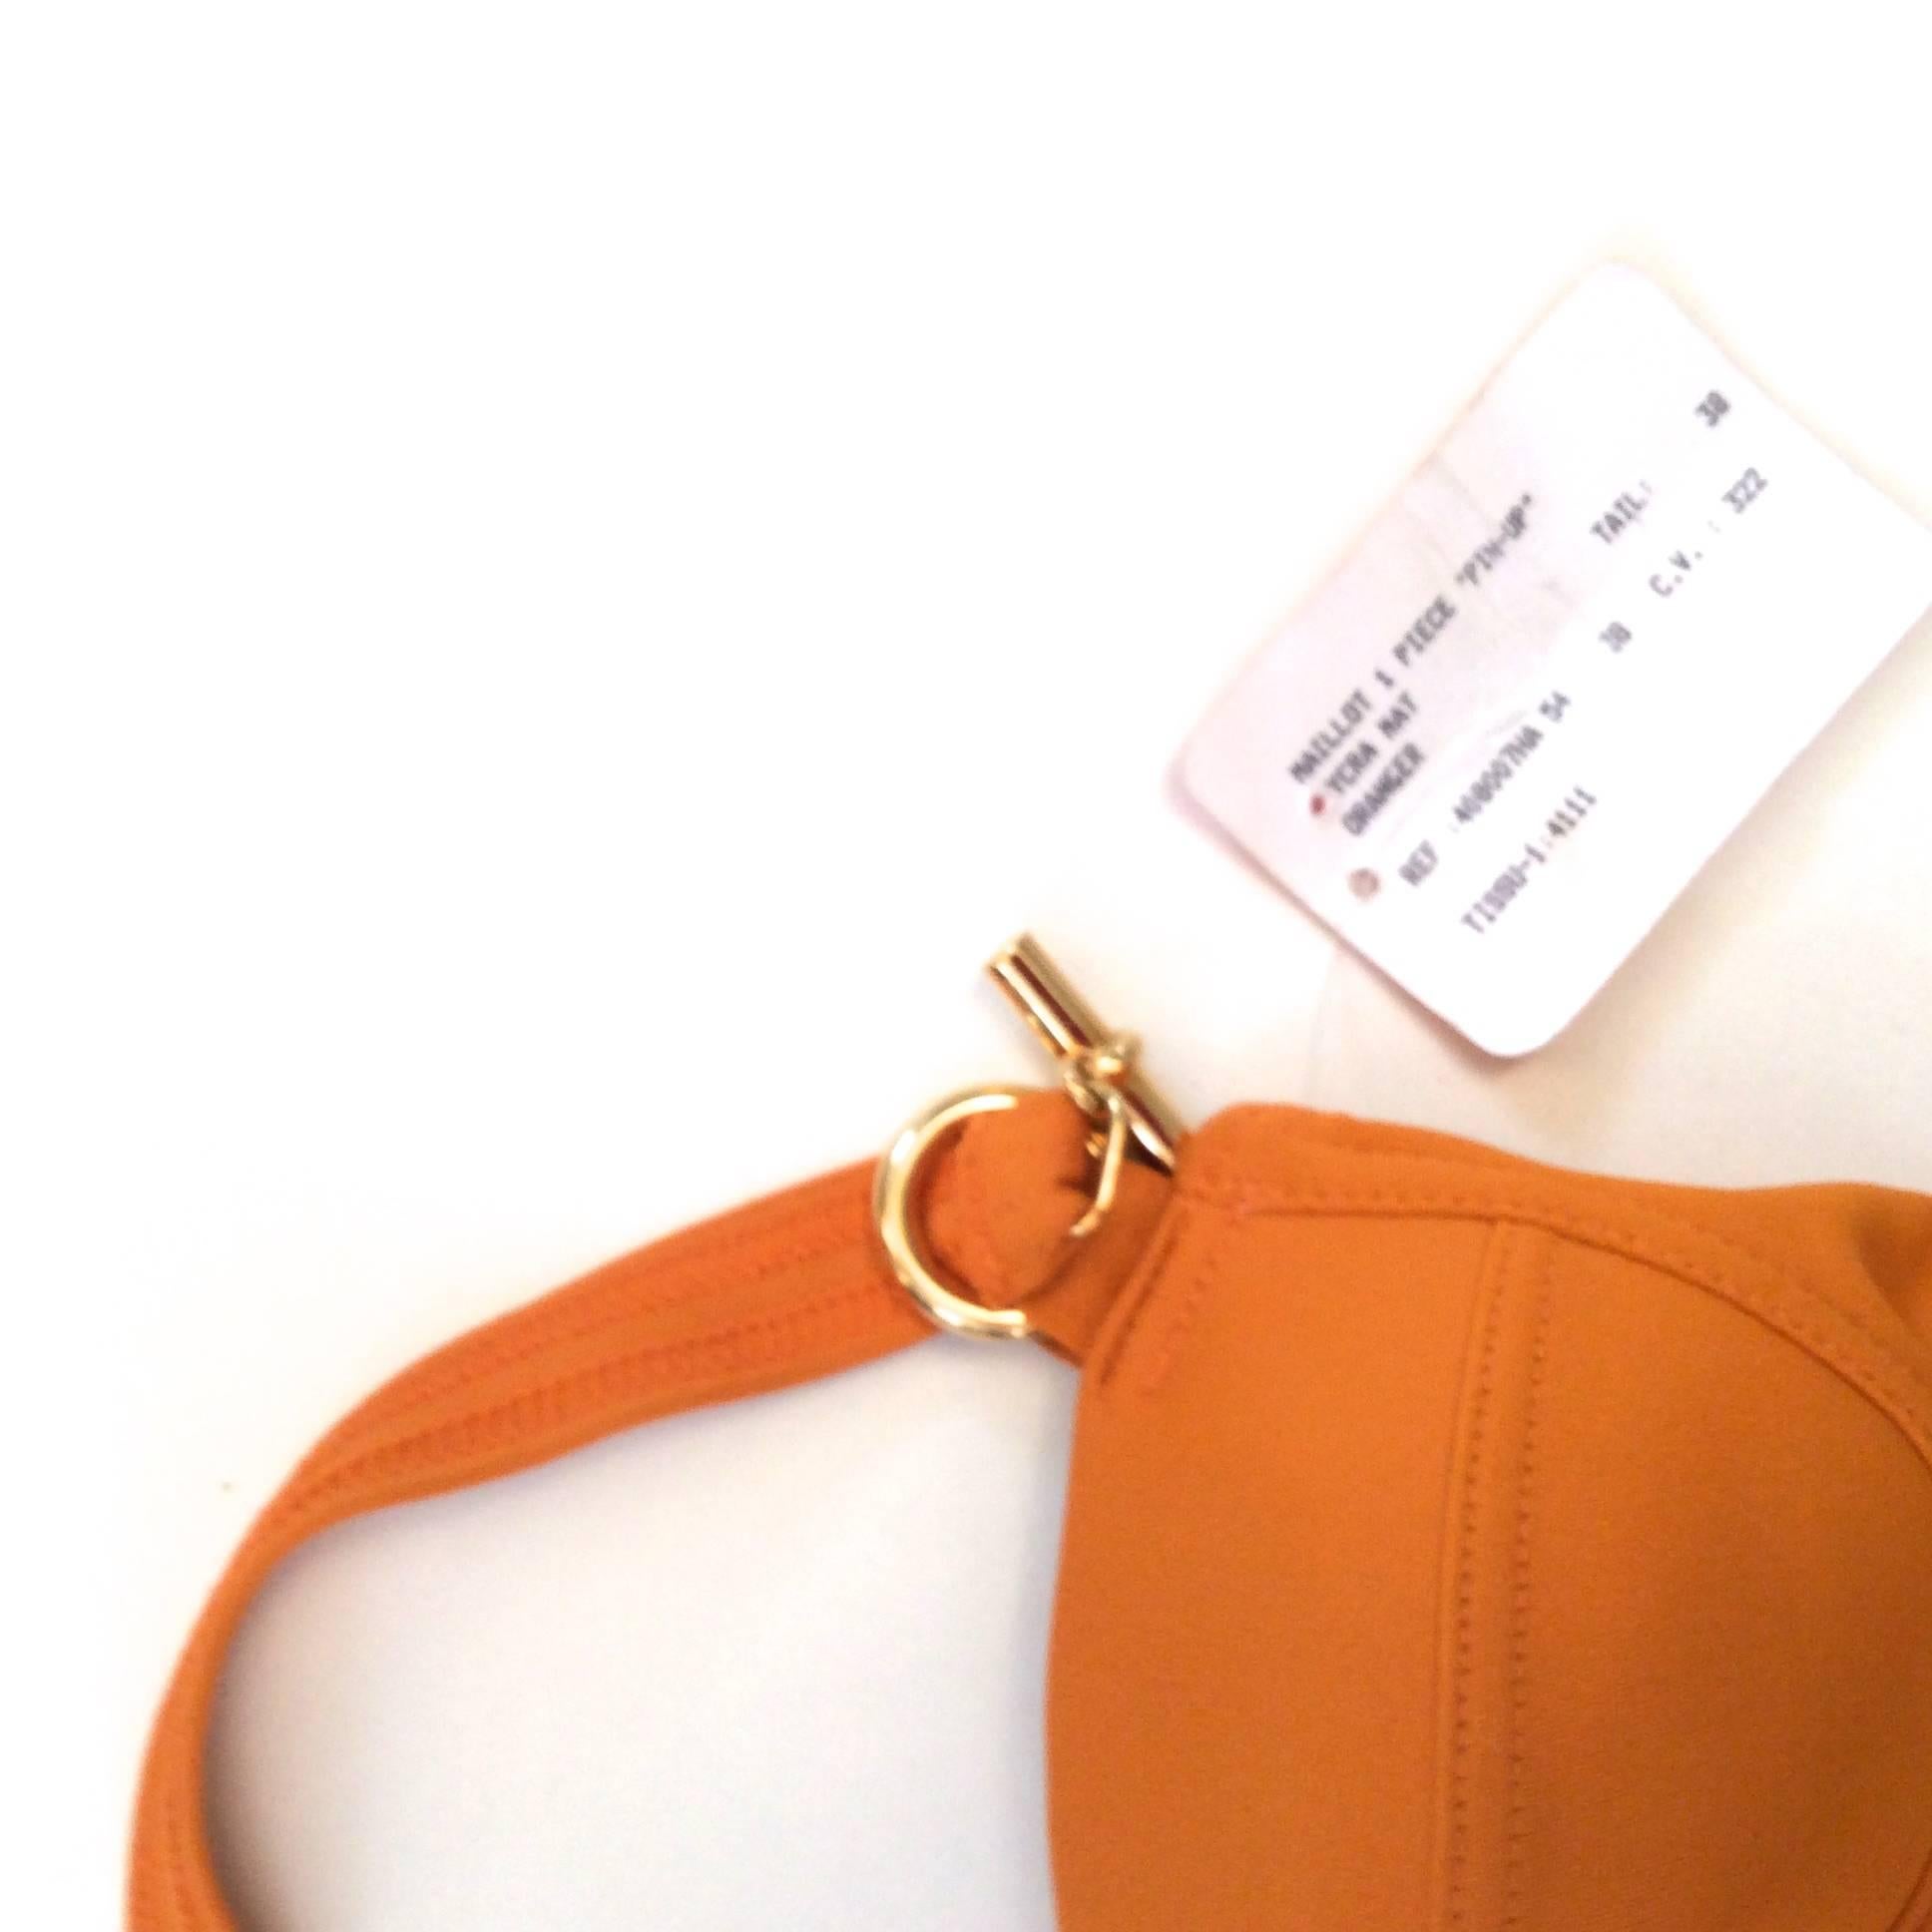 Presented here is a beautiful orange, new, size 38 Hermes bathing suit. Beautiful bathing suit is 88% nylon and 12% lycra. It has an incredibly strong and flattering fit. This one piece suit encompasses a single strap which goes around the top of